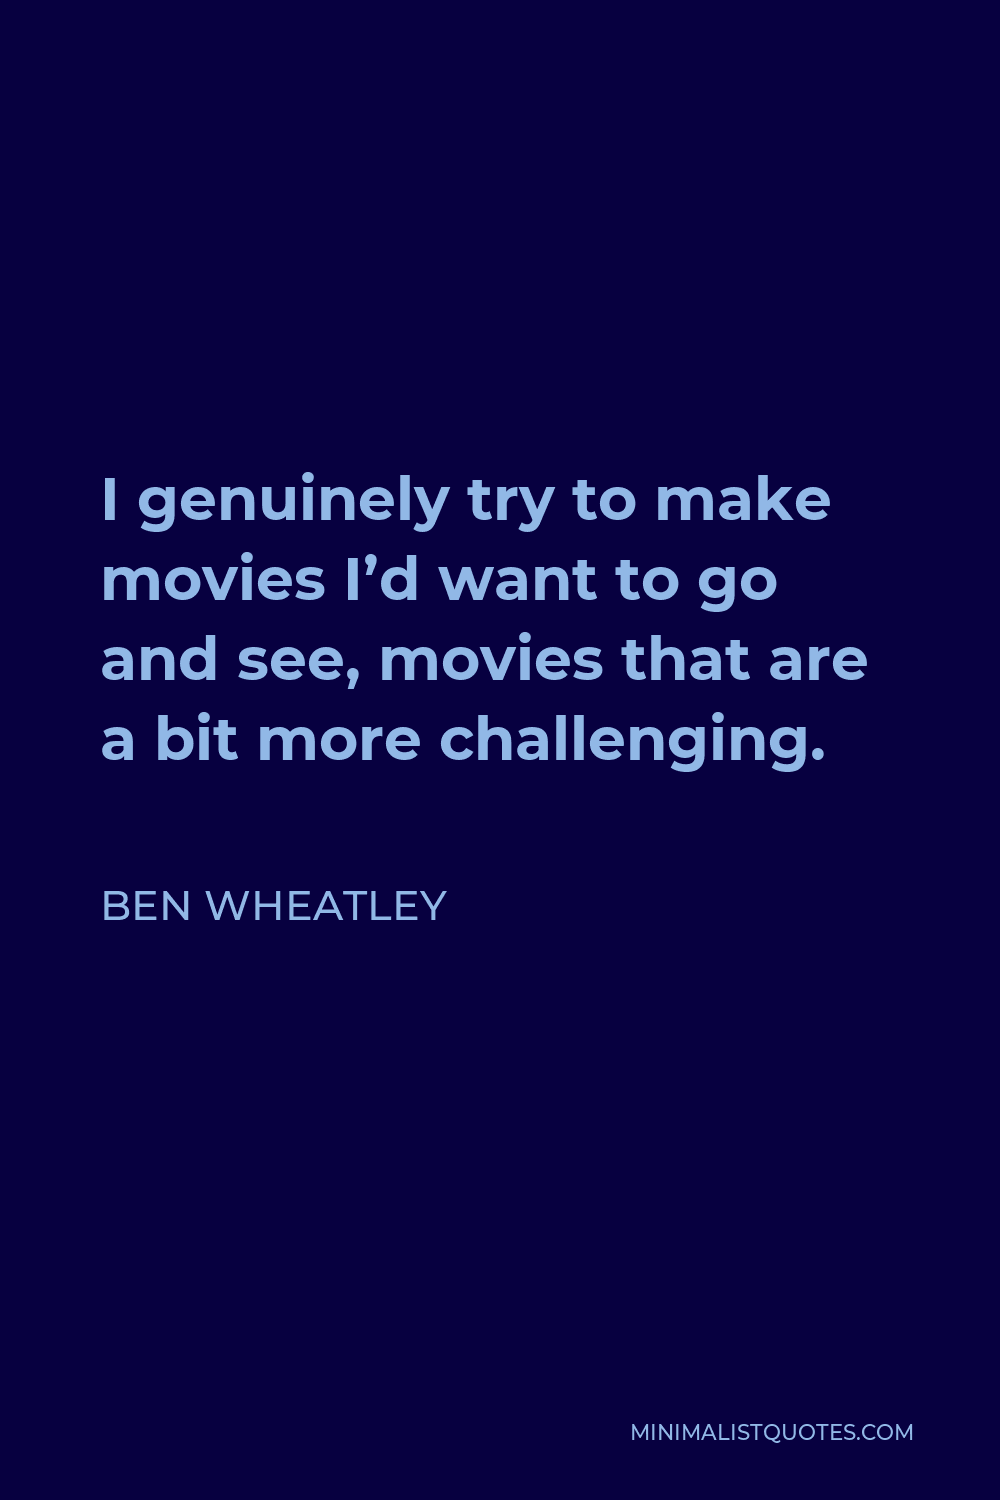 Ben Wheatley Quote - I genuinely try to make movies I’d want to go and see, movies that are a bit more challenging.